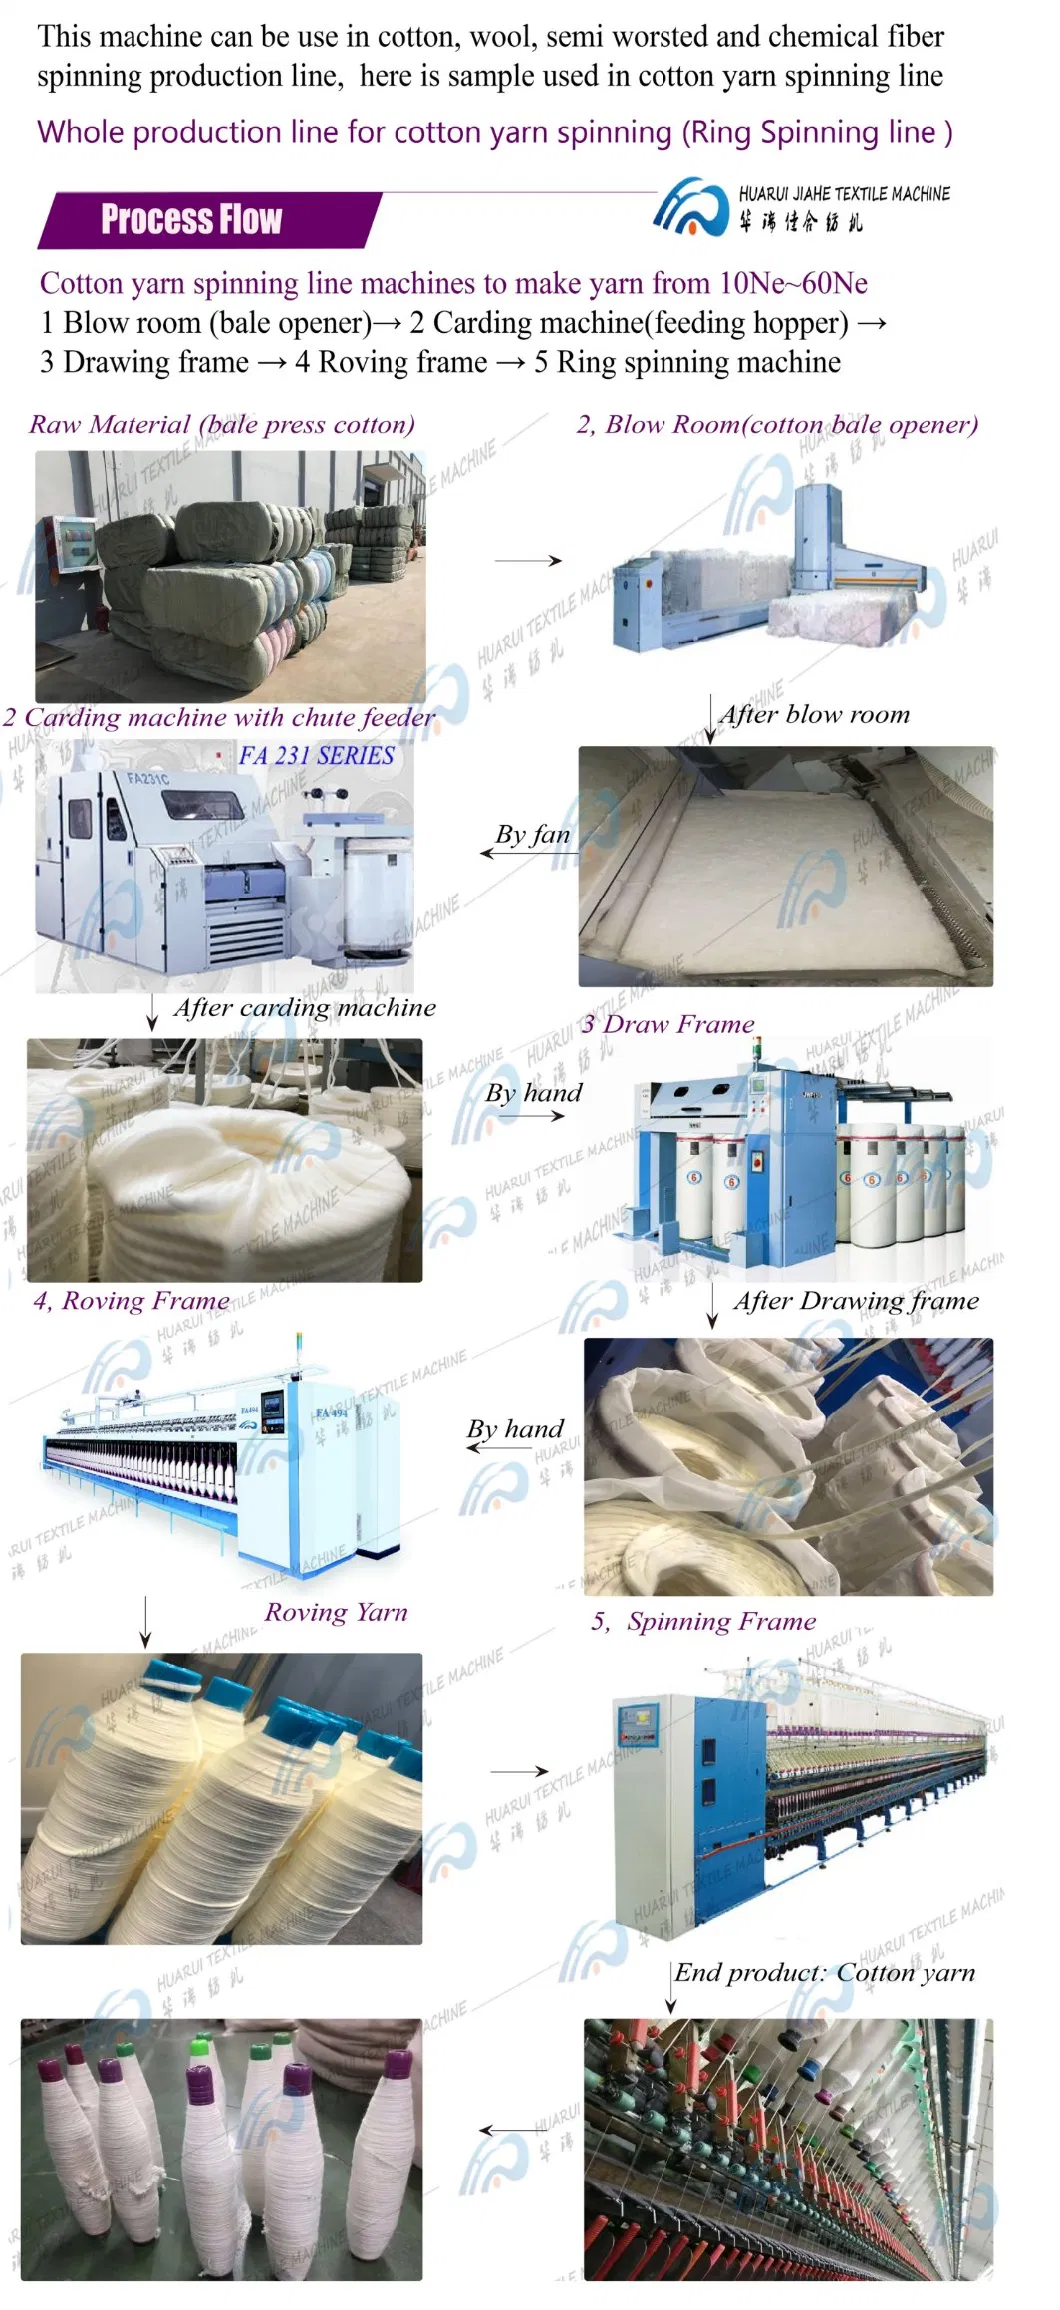 Better Dyeing Machine, Cone Yarn, Hank Cotton, Polyester and Woolen Yarn Dual-Purpose Dryer Made in China